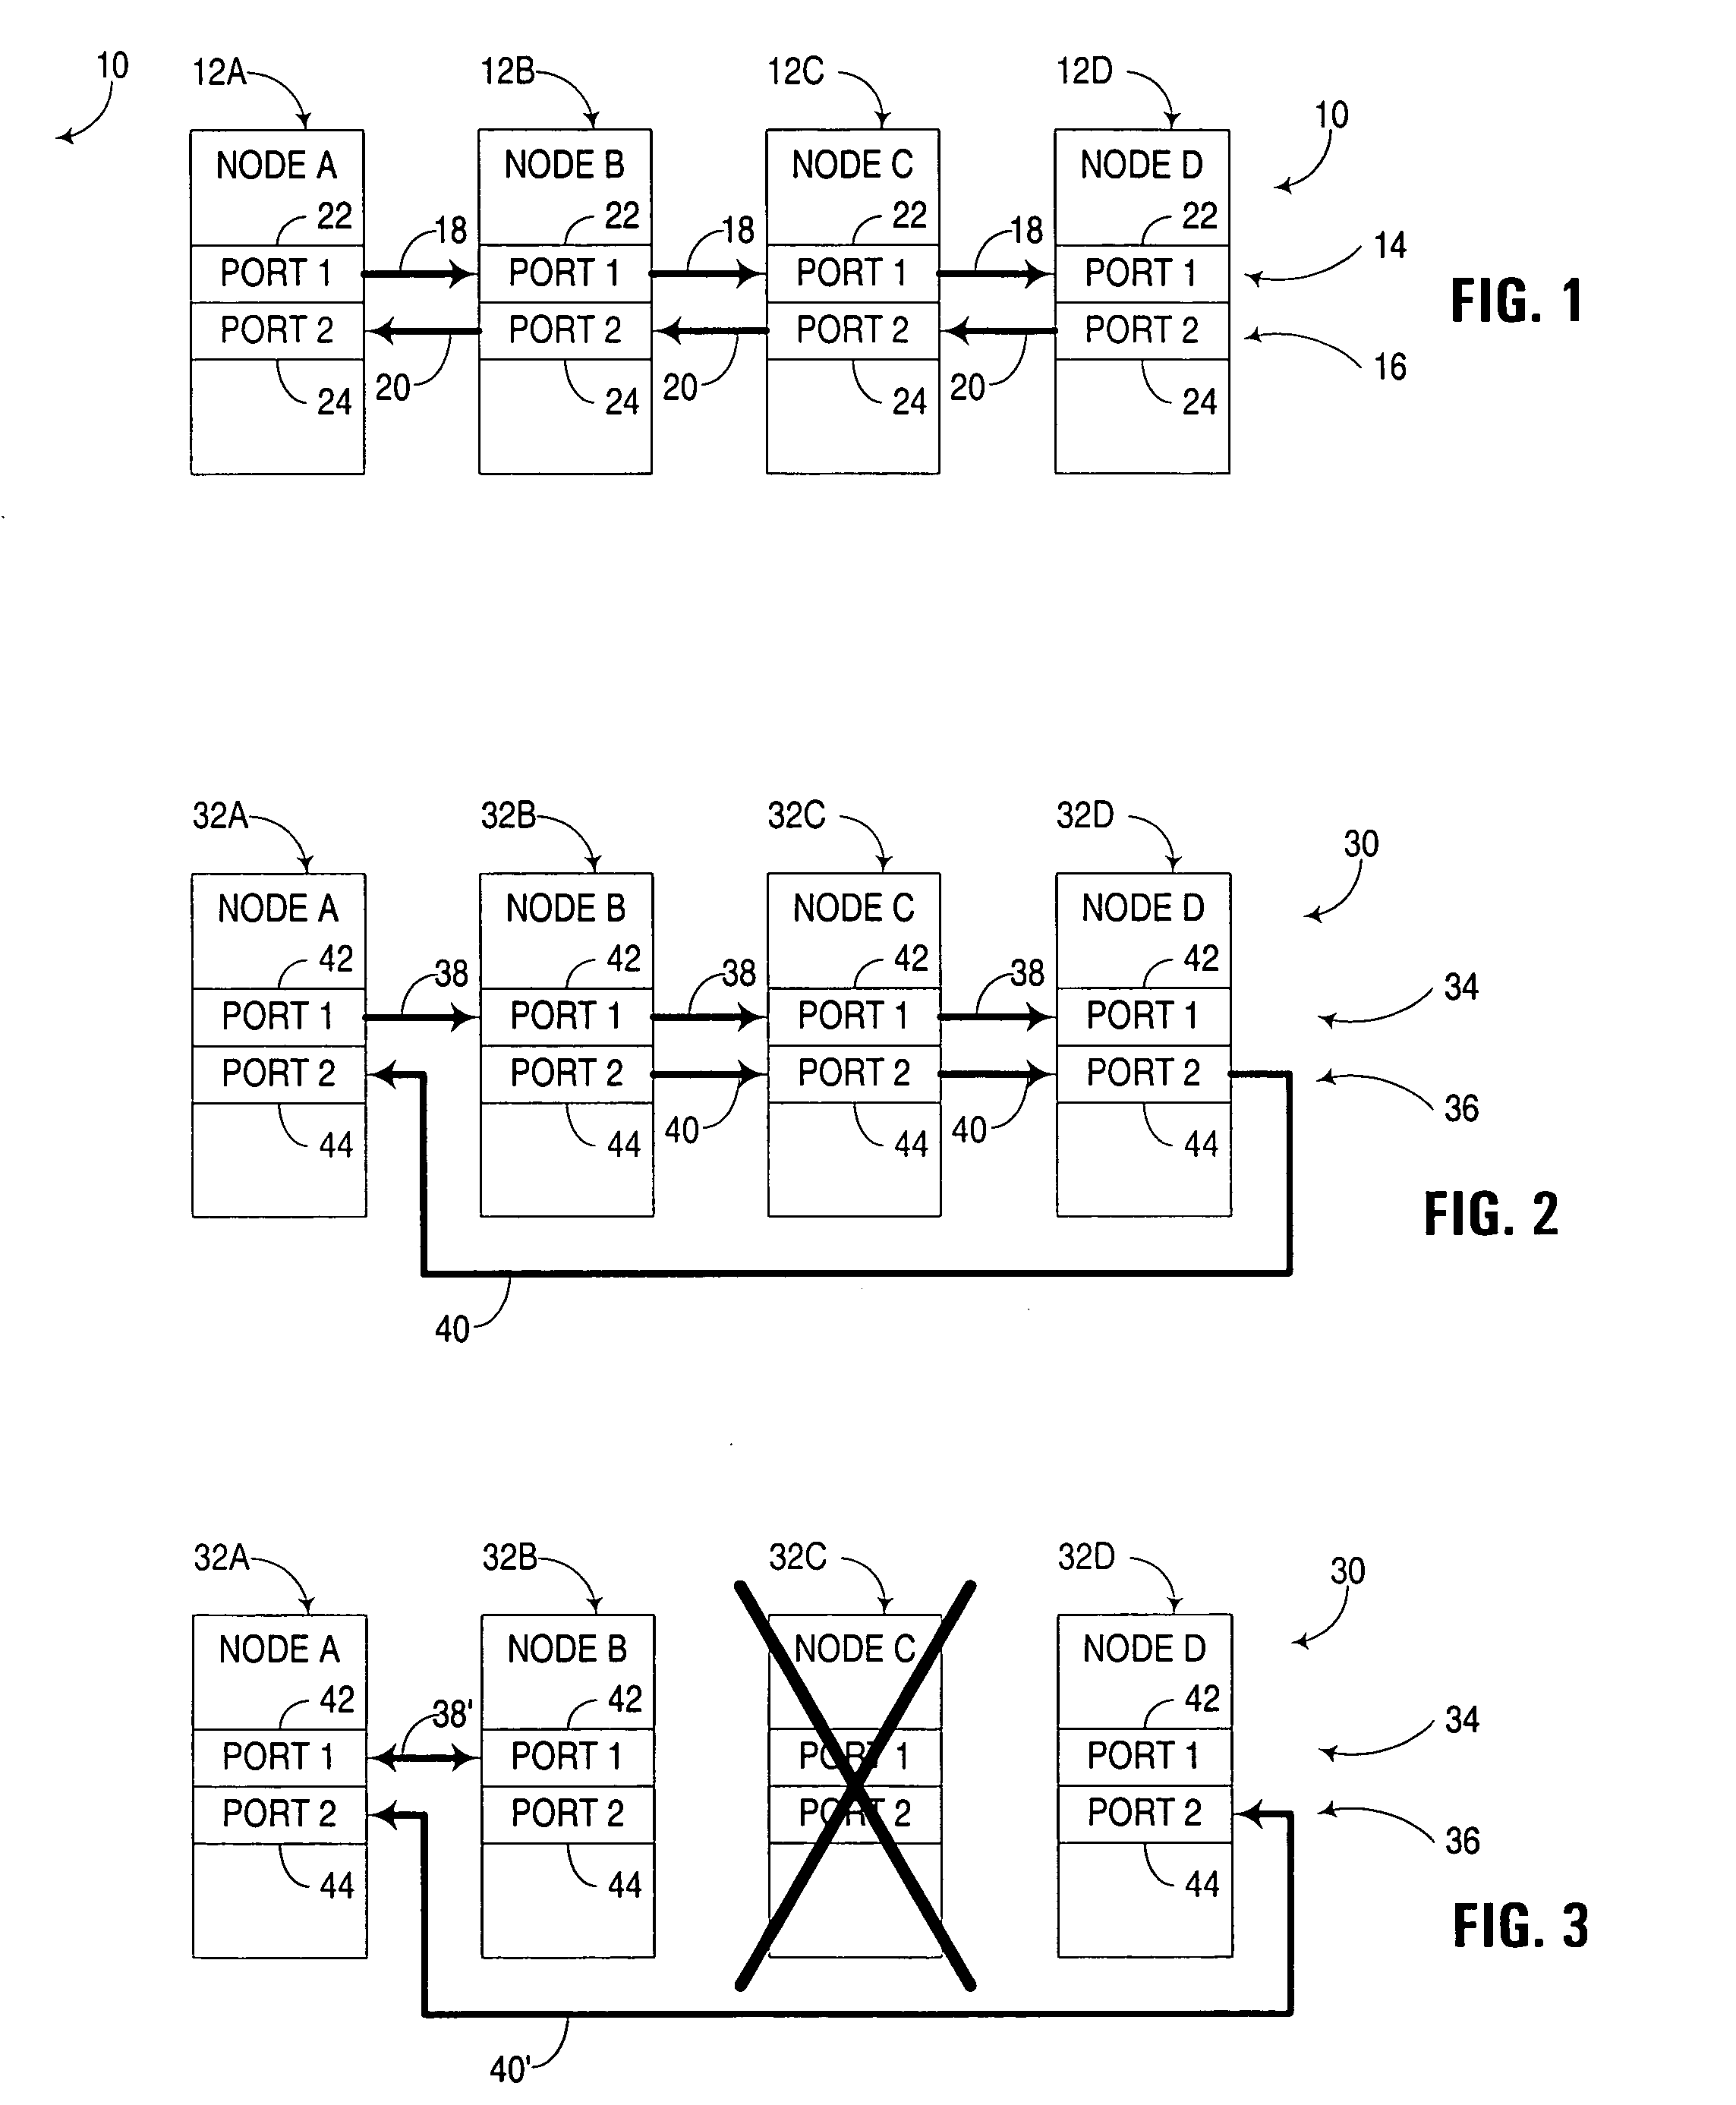 Multi-node architecture with daisy chain communication link configurable to operate in unidirectional and bidirectional modes